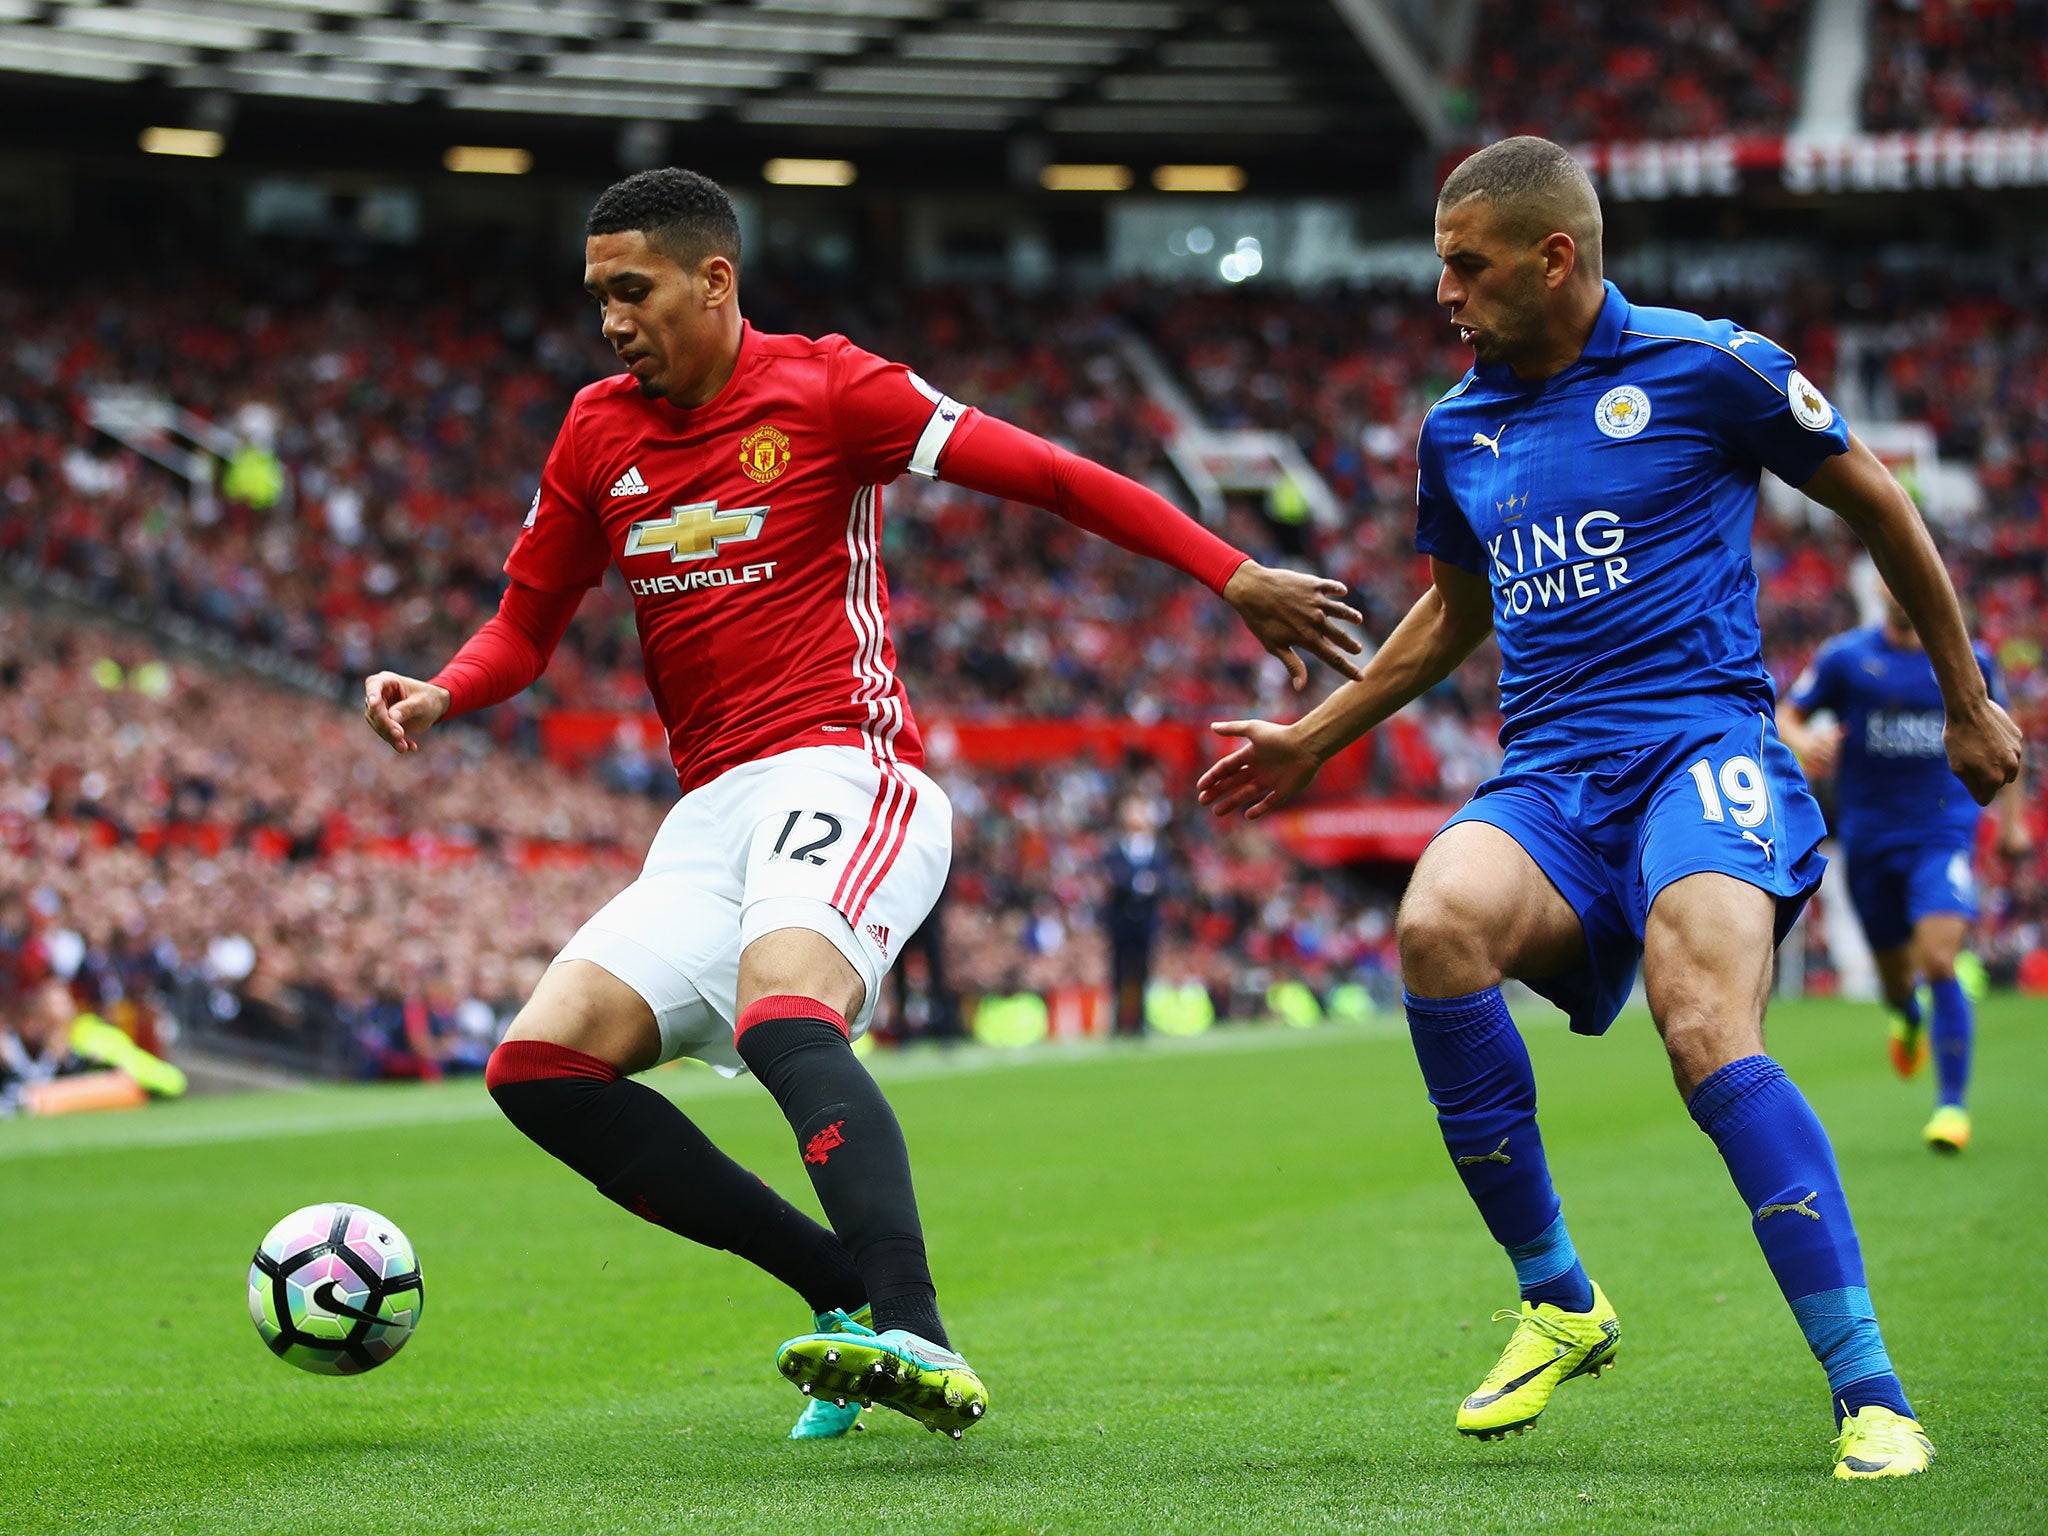 Chris Smalling in action for United against Leicester City last September